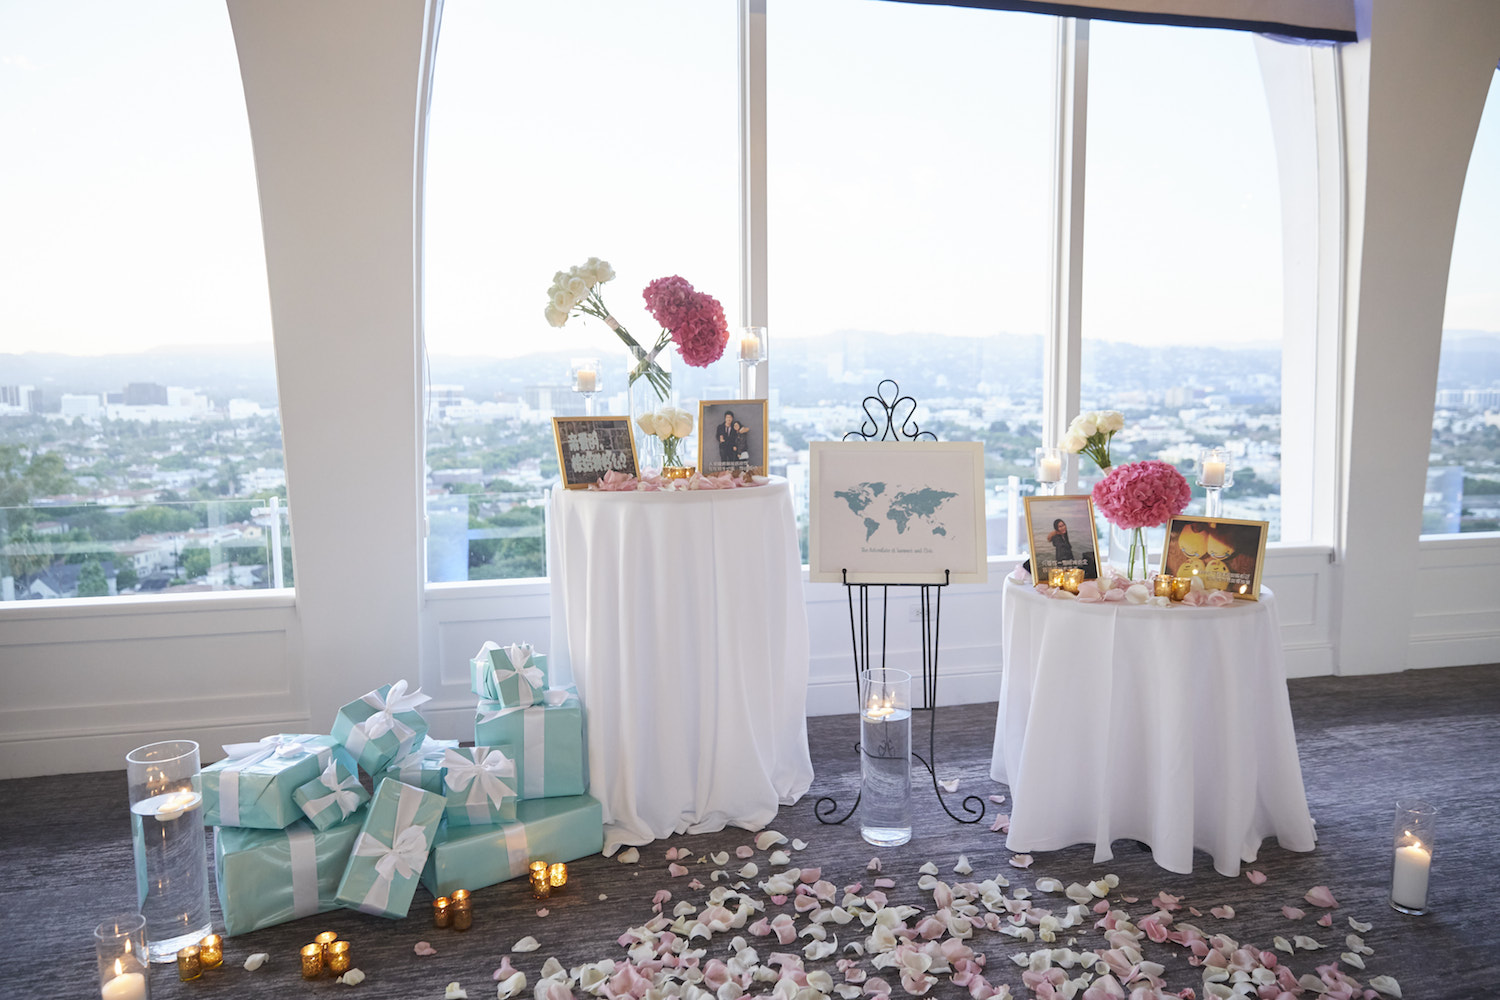 Beautiful proposal setup with flowers and map